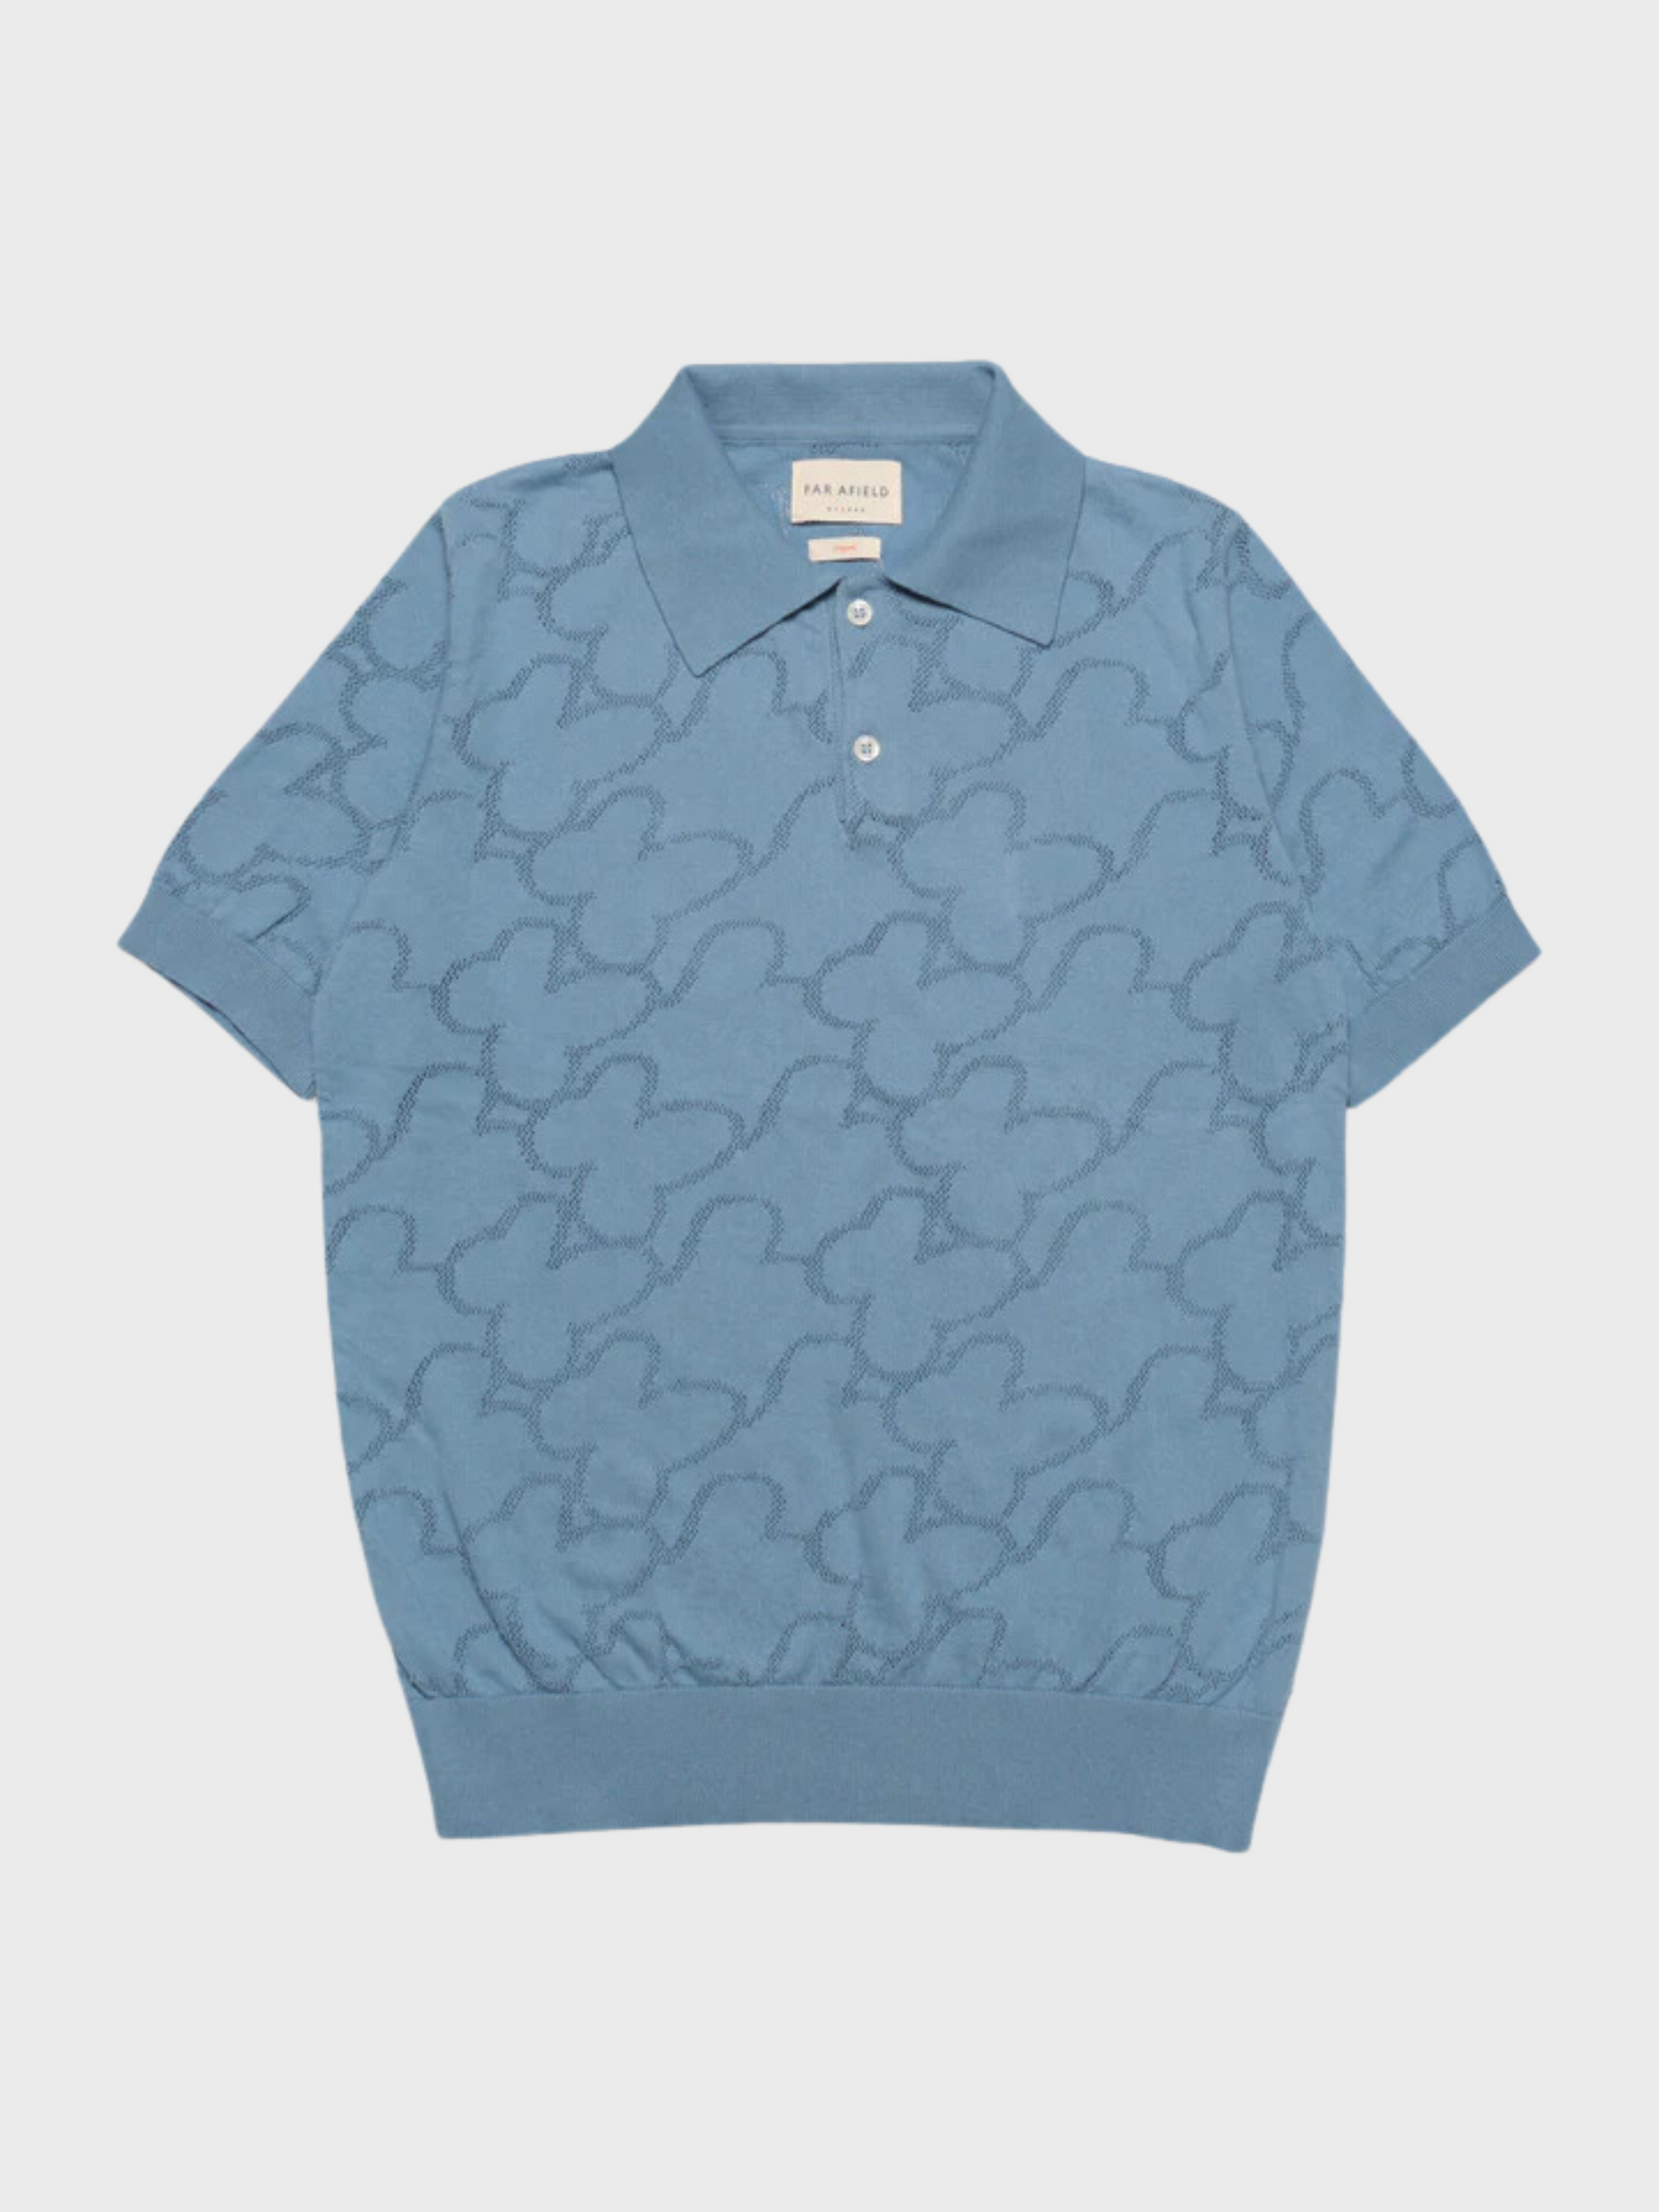 Far Afield Belser SS Polo Tee Allure Blue SS24-Men's T-Shirts-S-Yaletown-Vancouver-Surrey-Canada